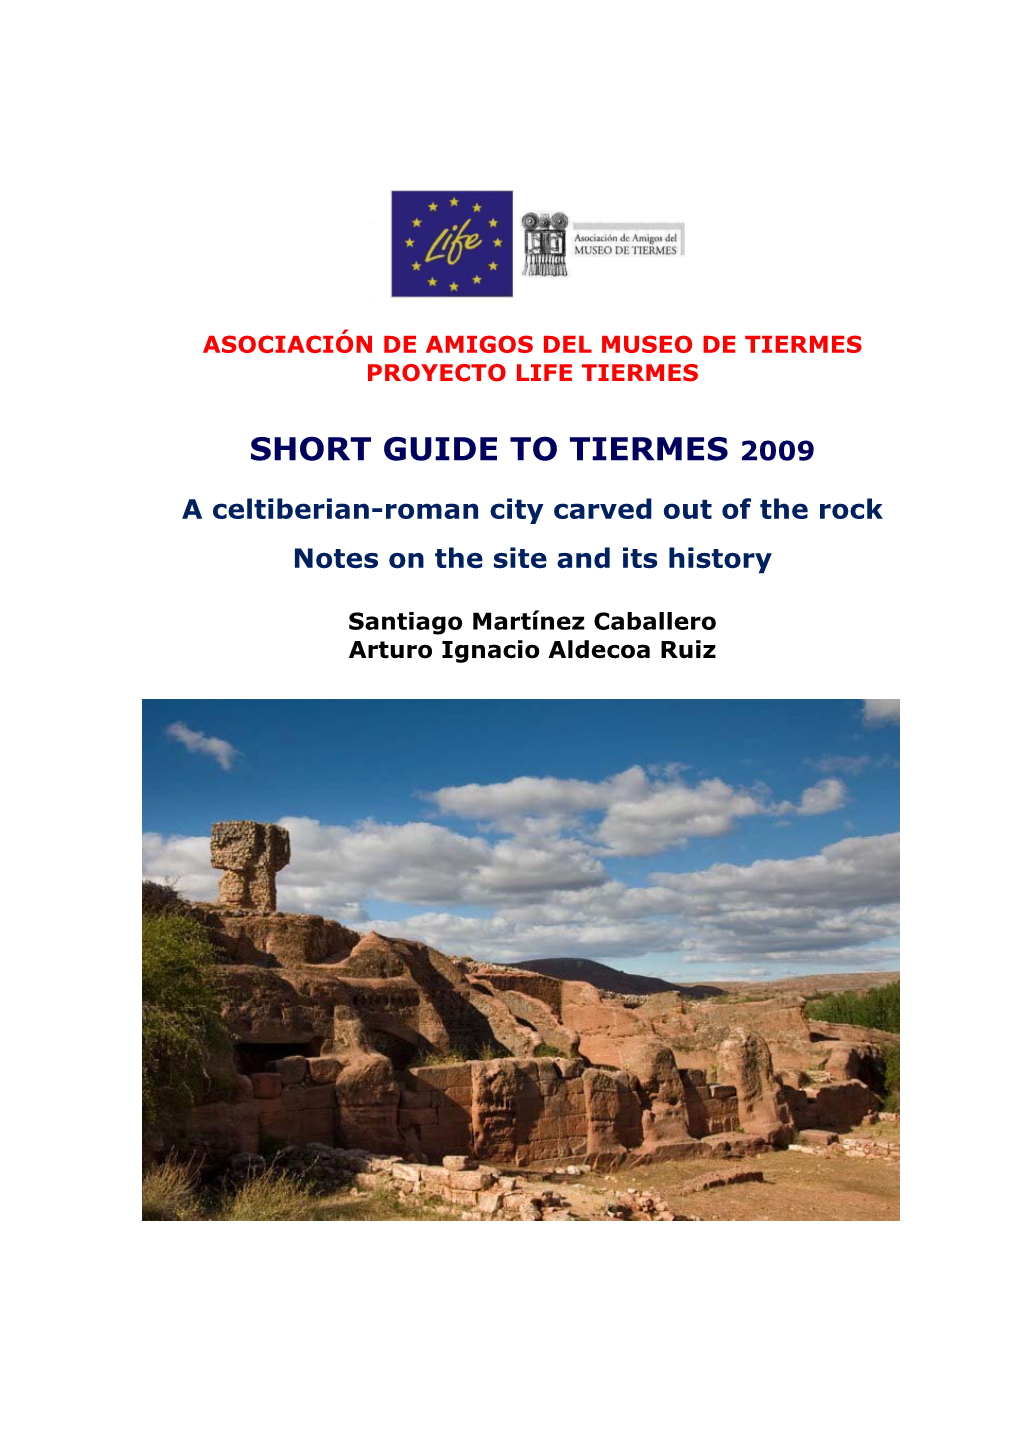 Short Guide to Tiermes 2009